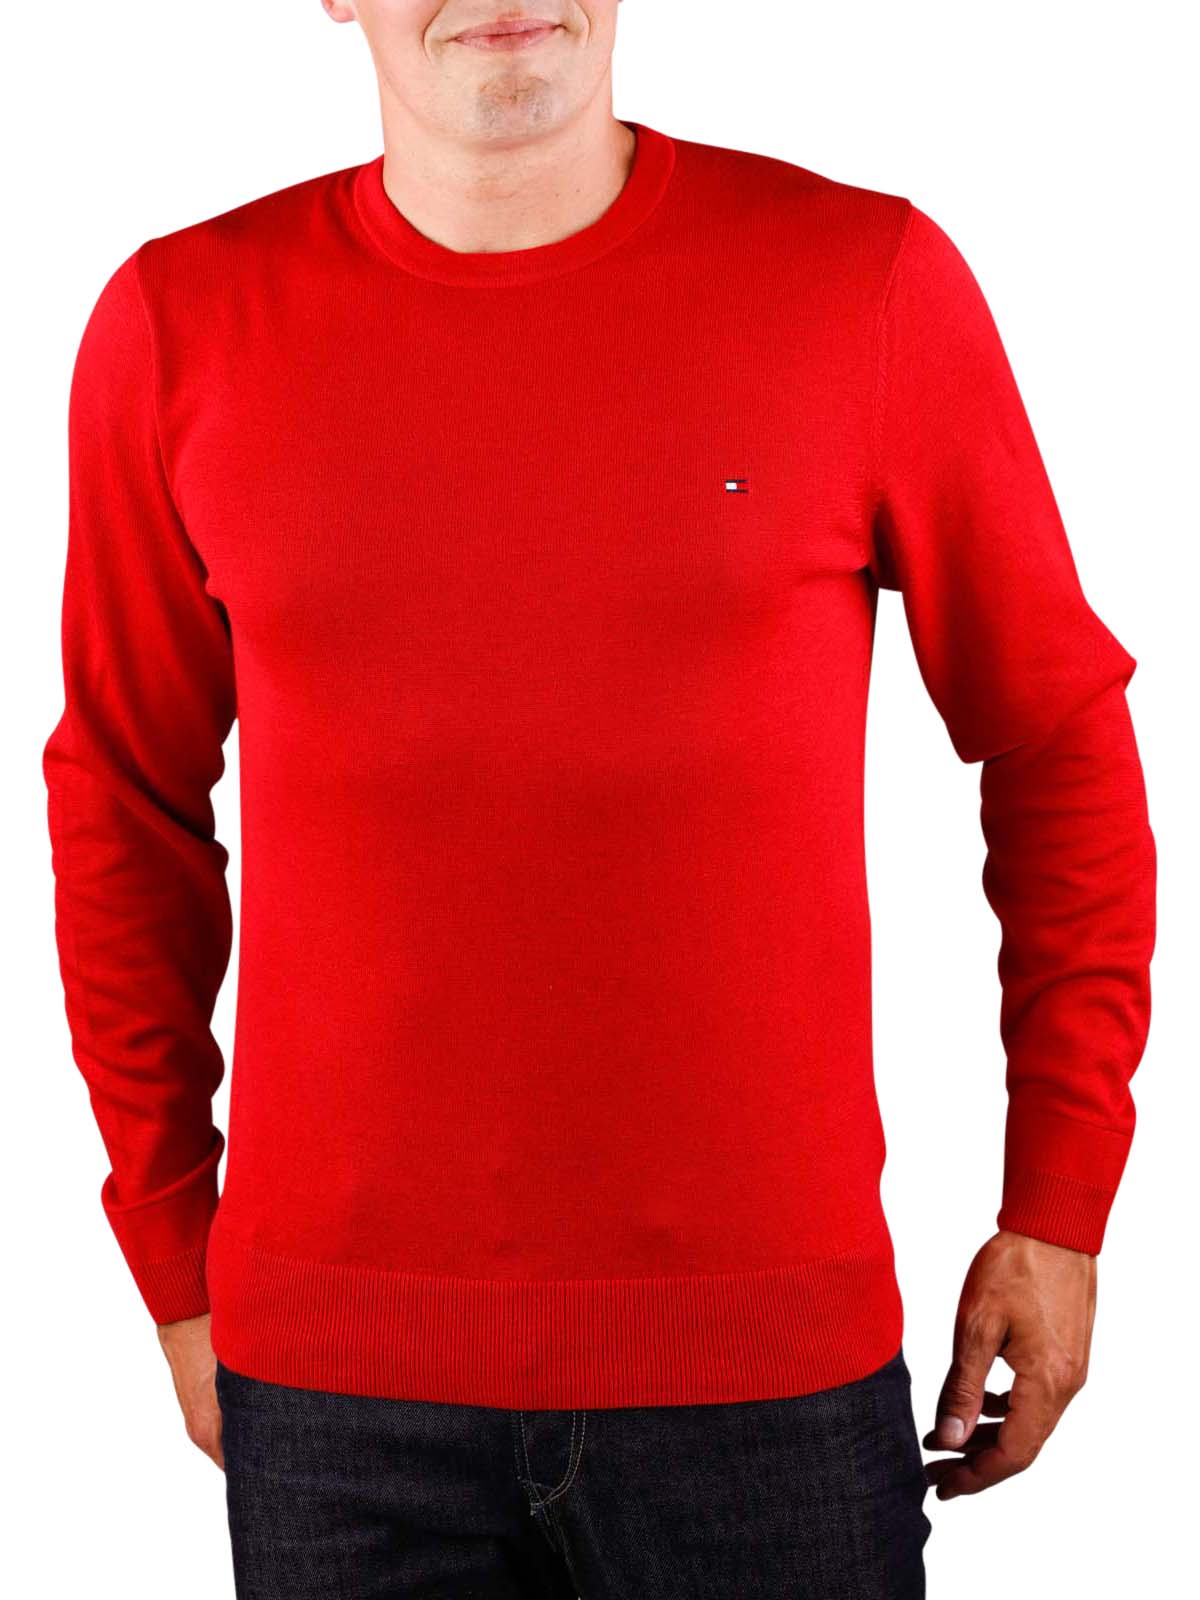 red sweater tommy hilfiger